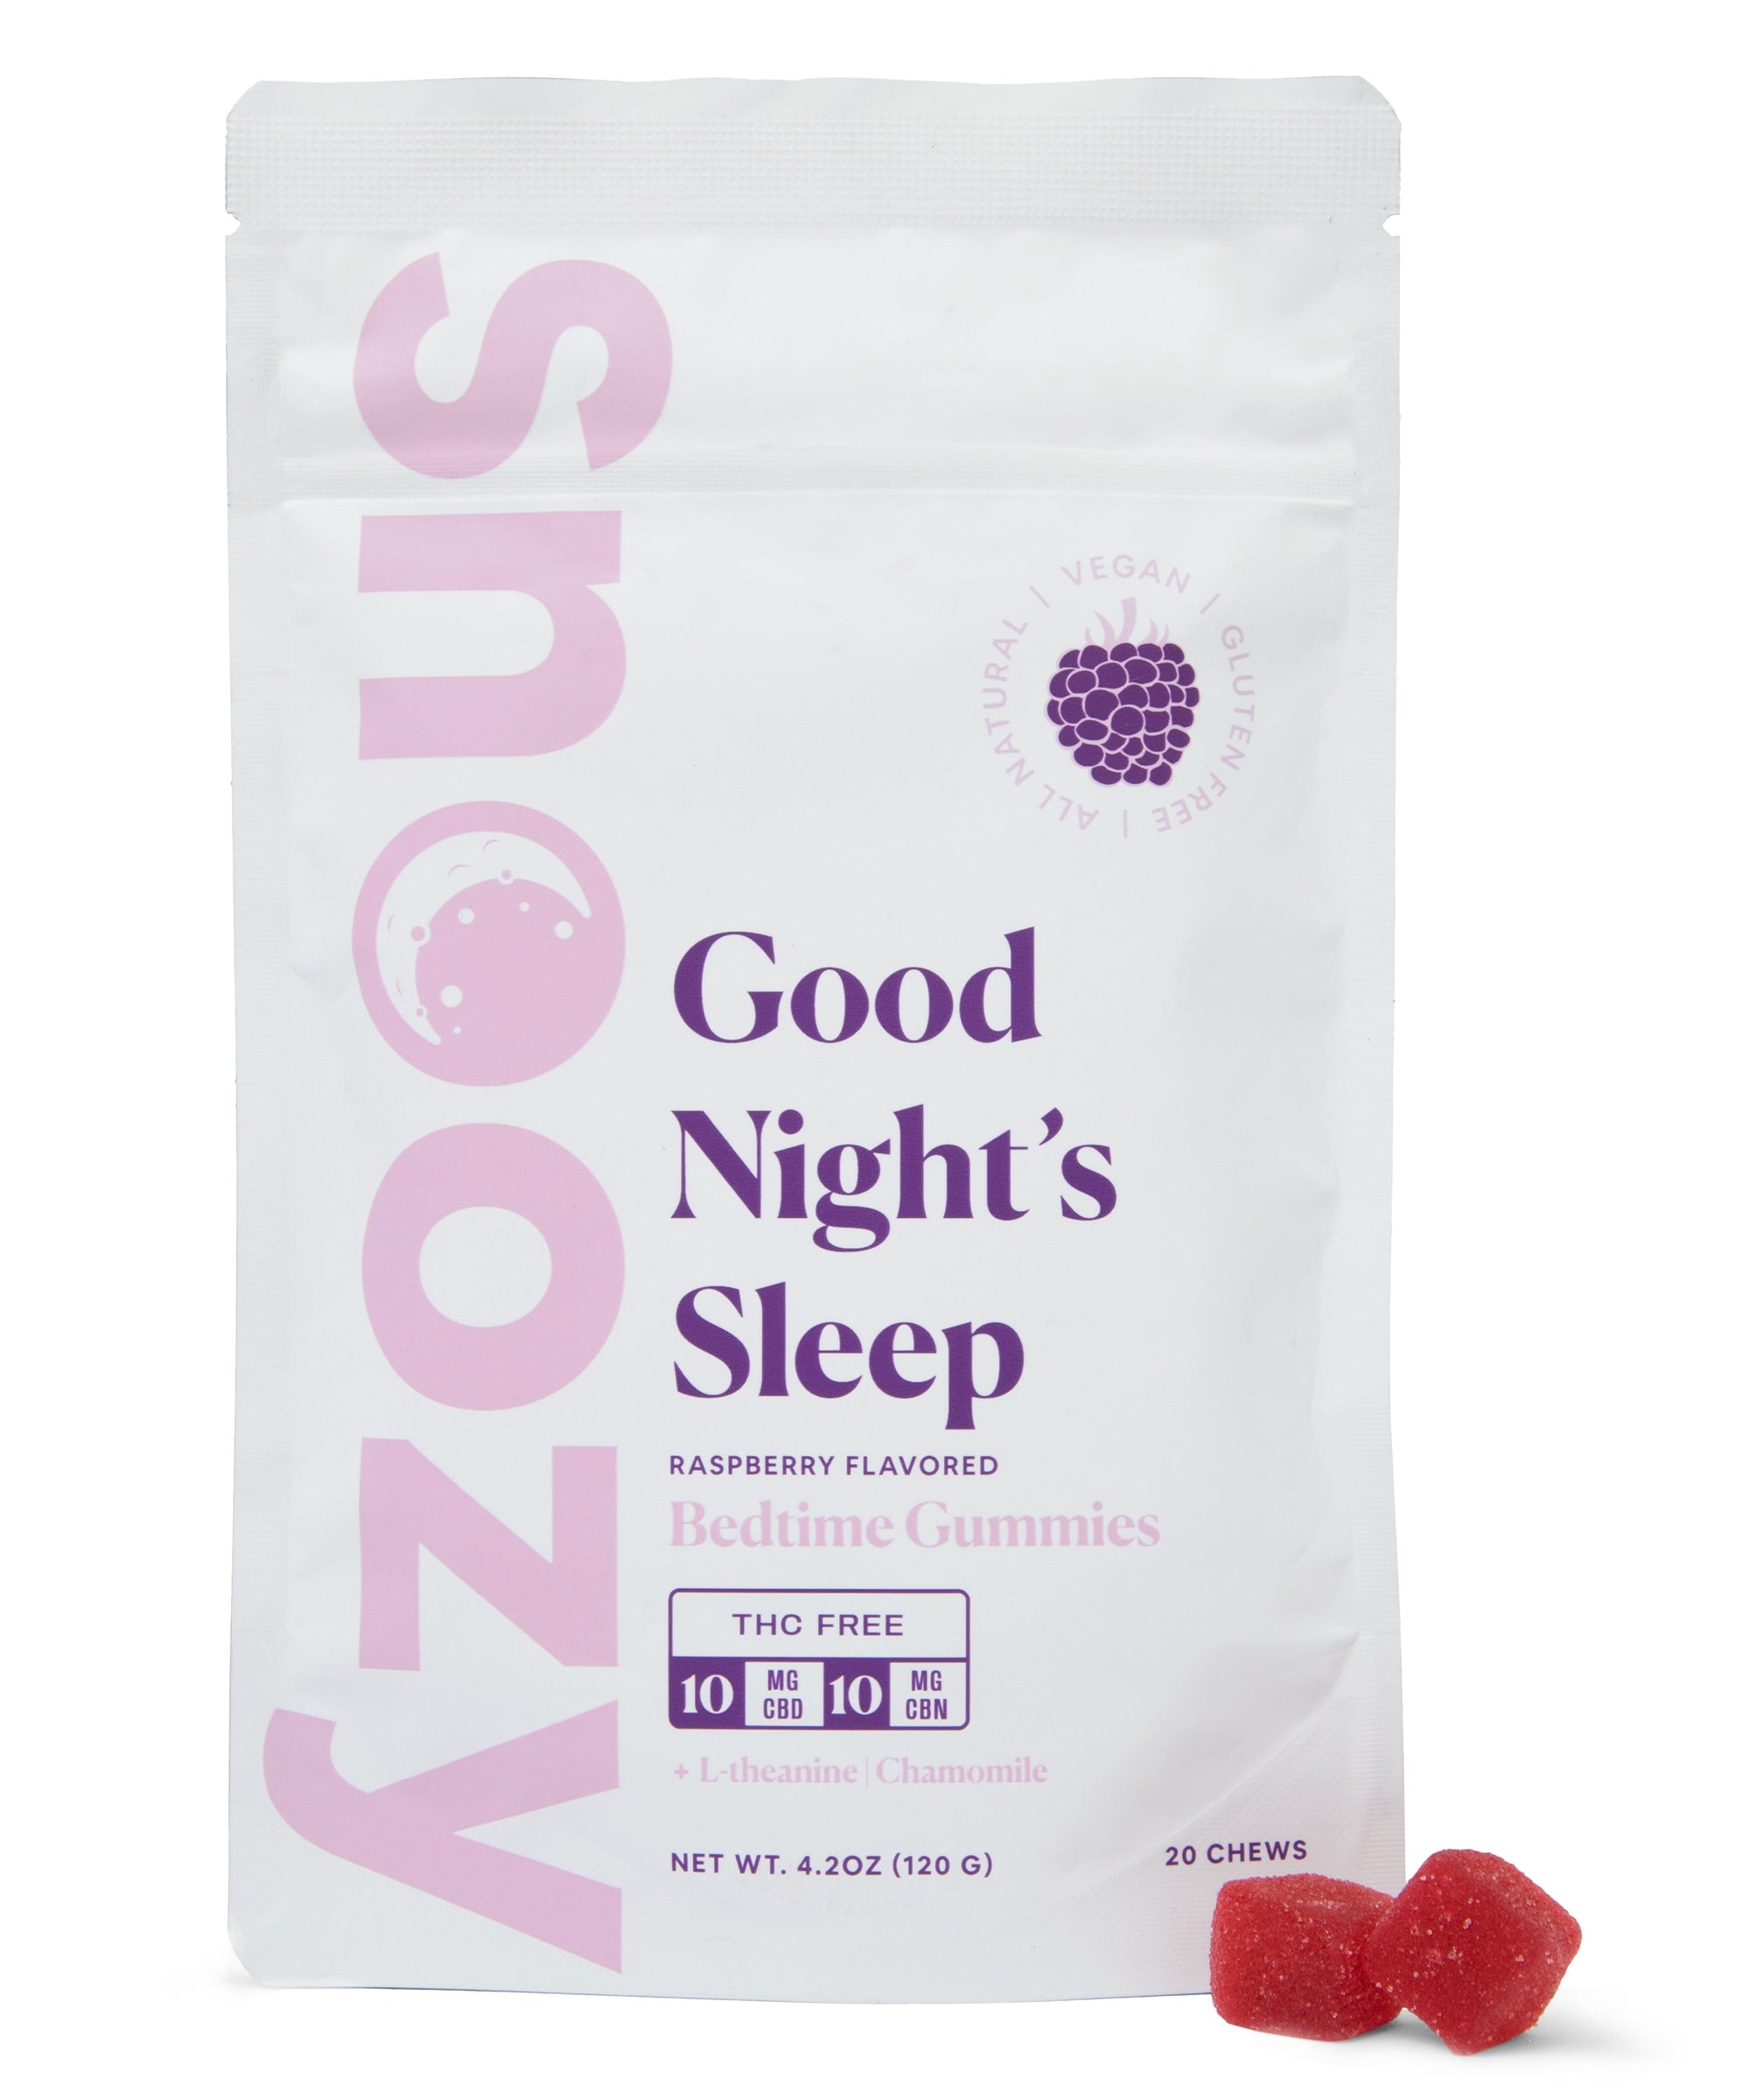 Nighthawks and early birds have one thing in common - good and consistent rest is important to overall health. Snoozy Good Night's Sleep Gummies help you get the rest you need when you can’t sleep.